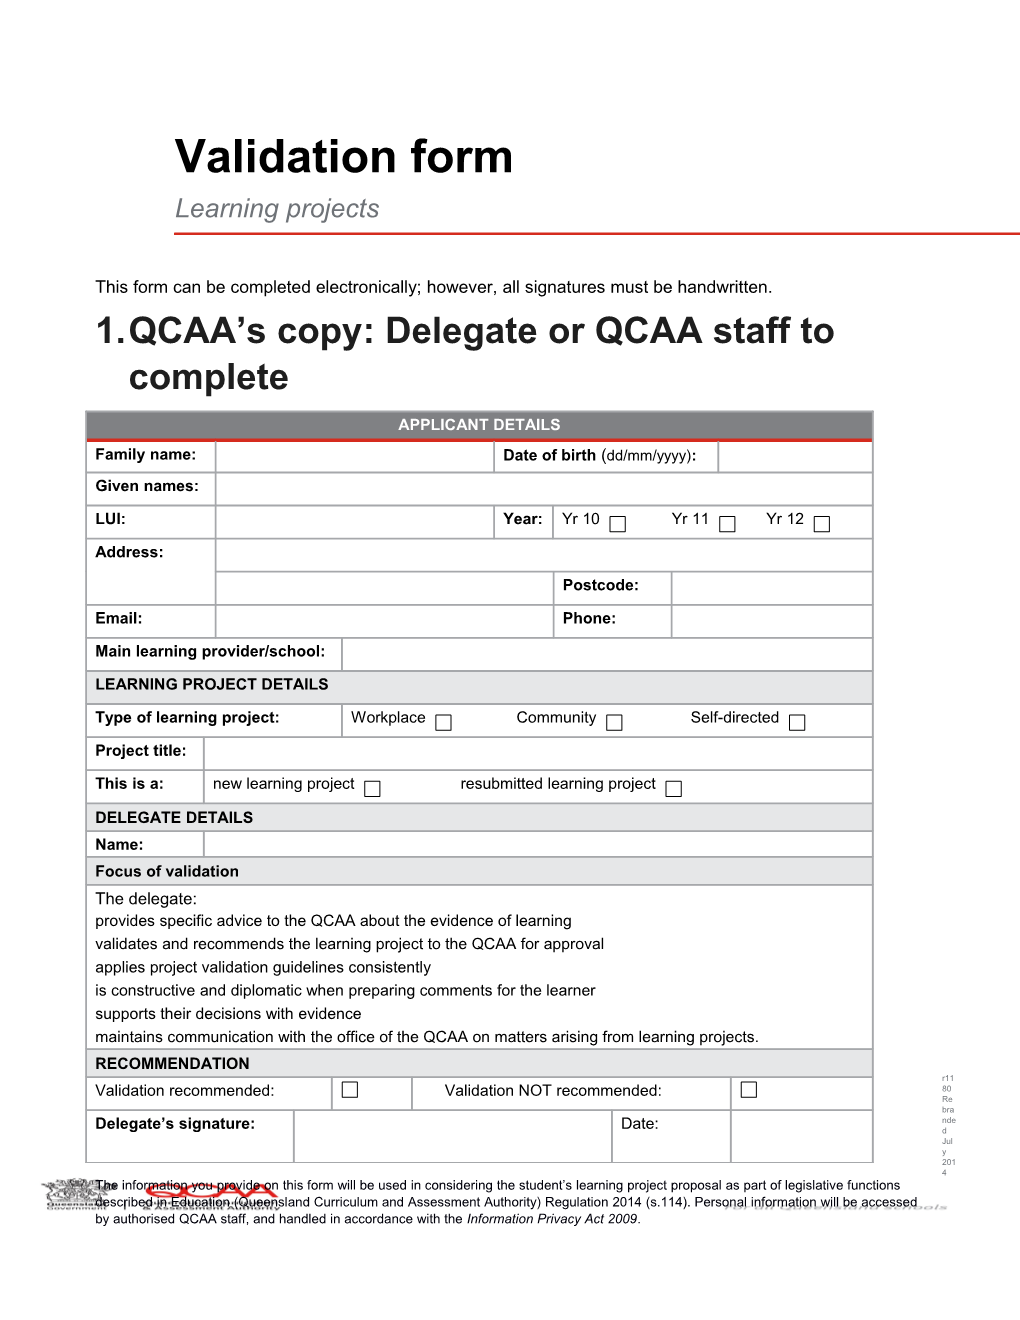 Learning Project Validation Form